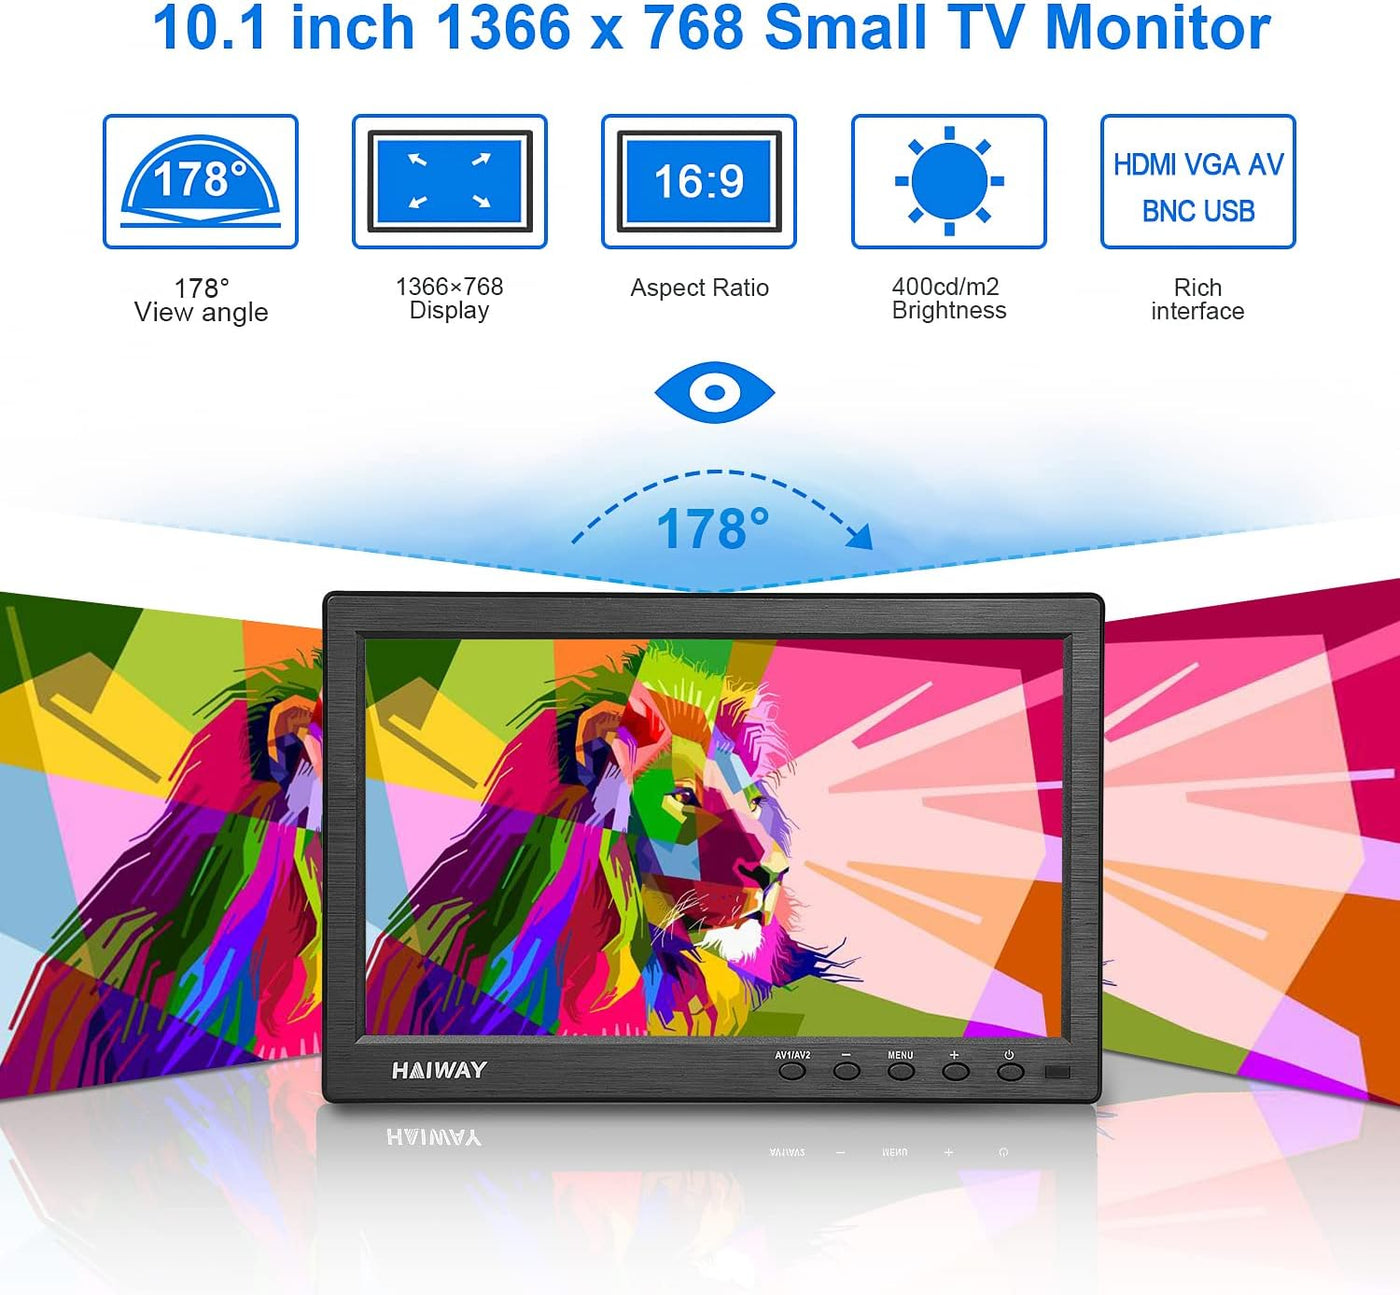 Haiway 10.1 inch Security Monitor, 1366x768 Resolution Small HDMI Monitor - $75